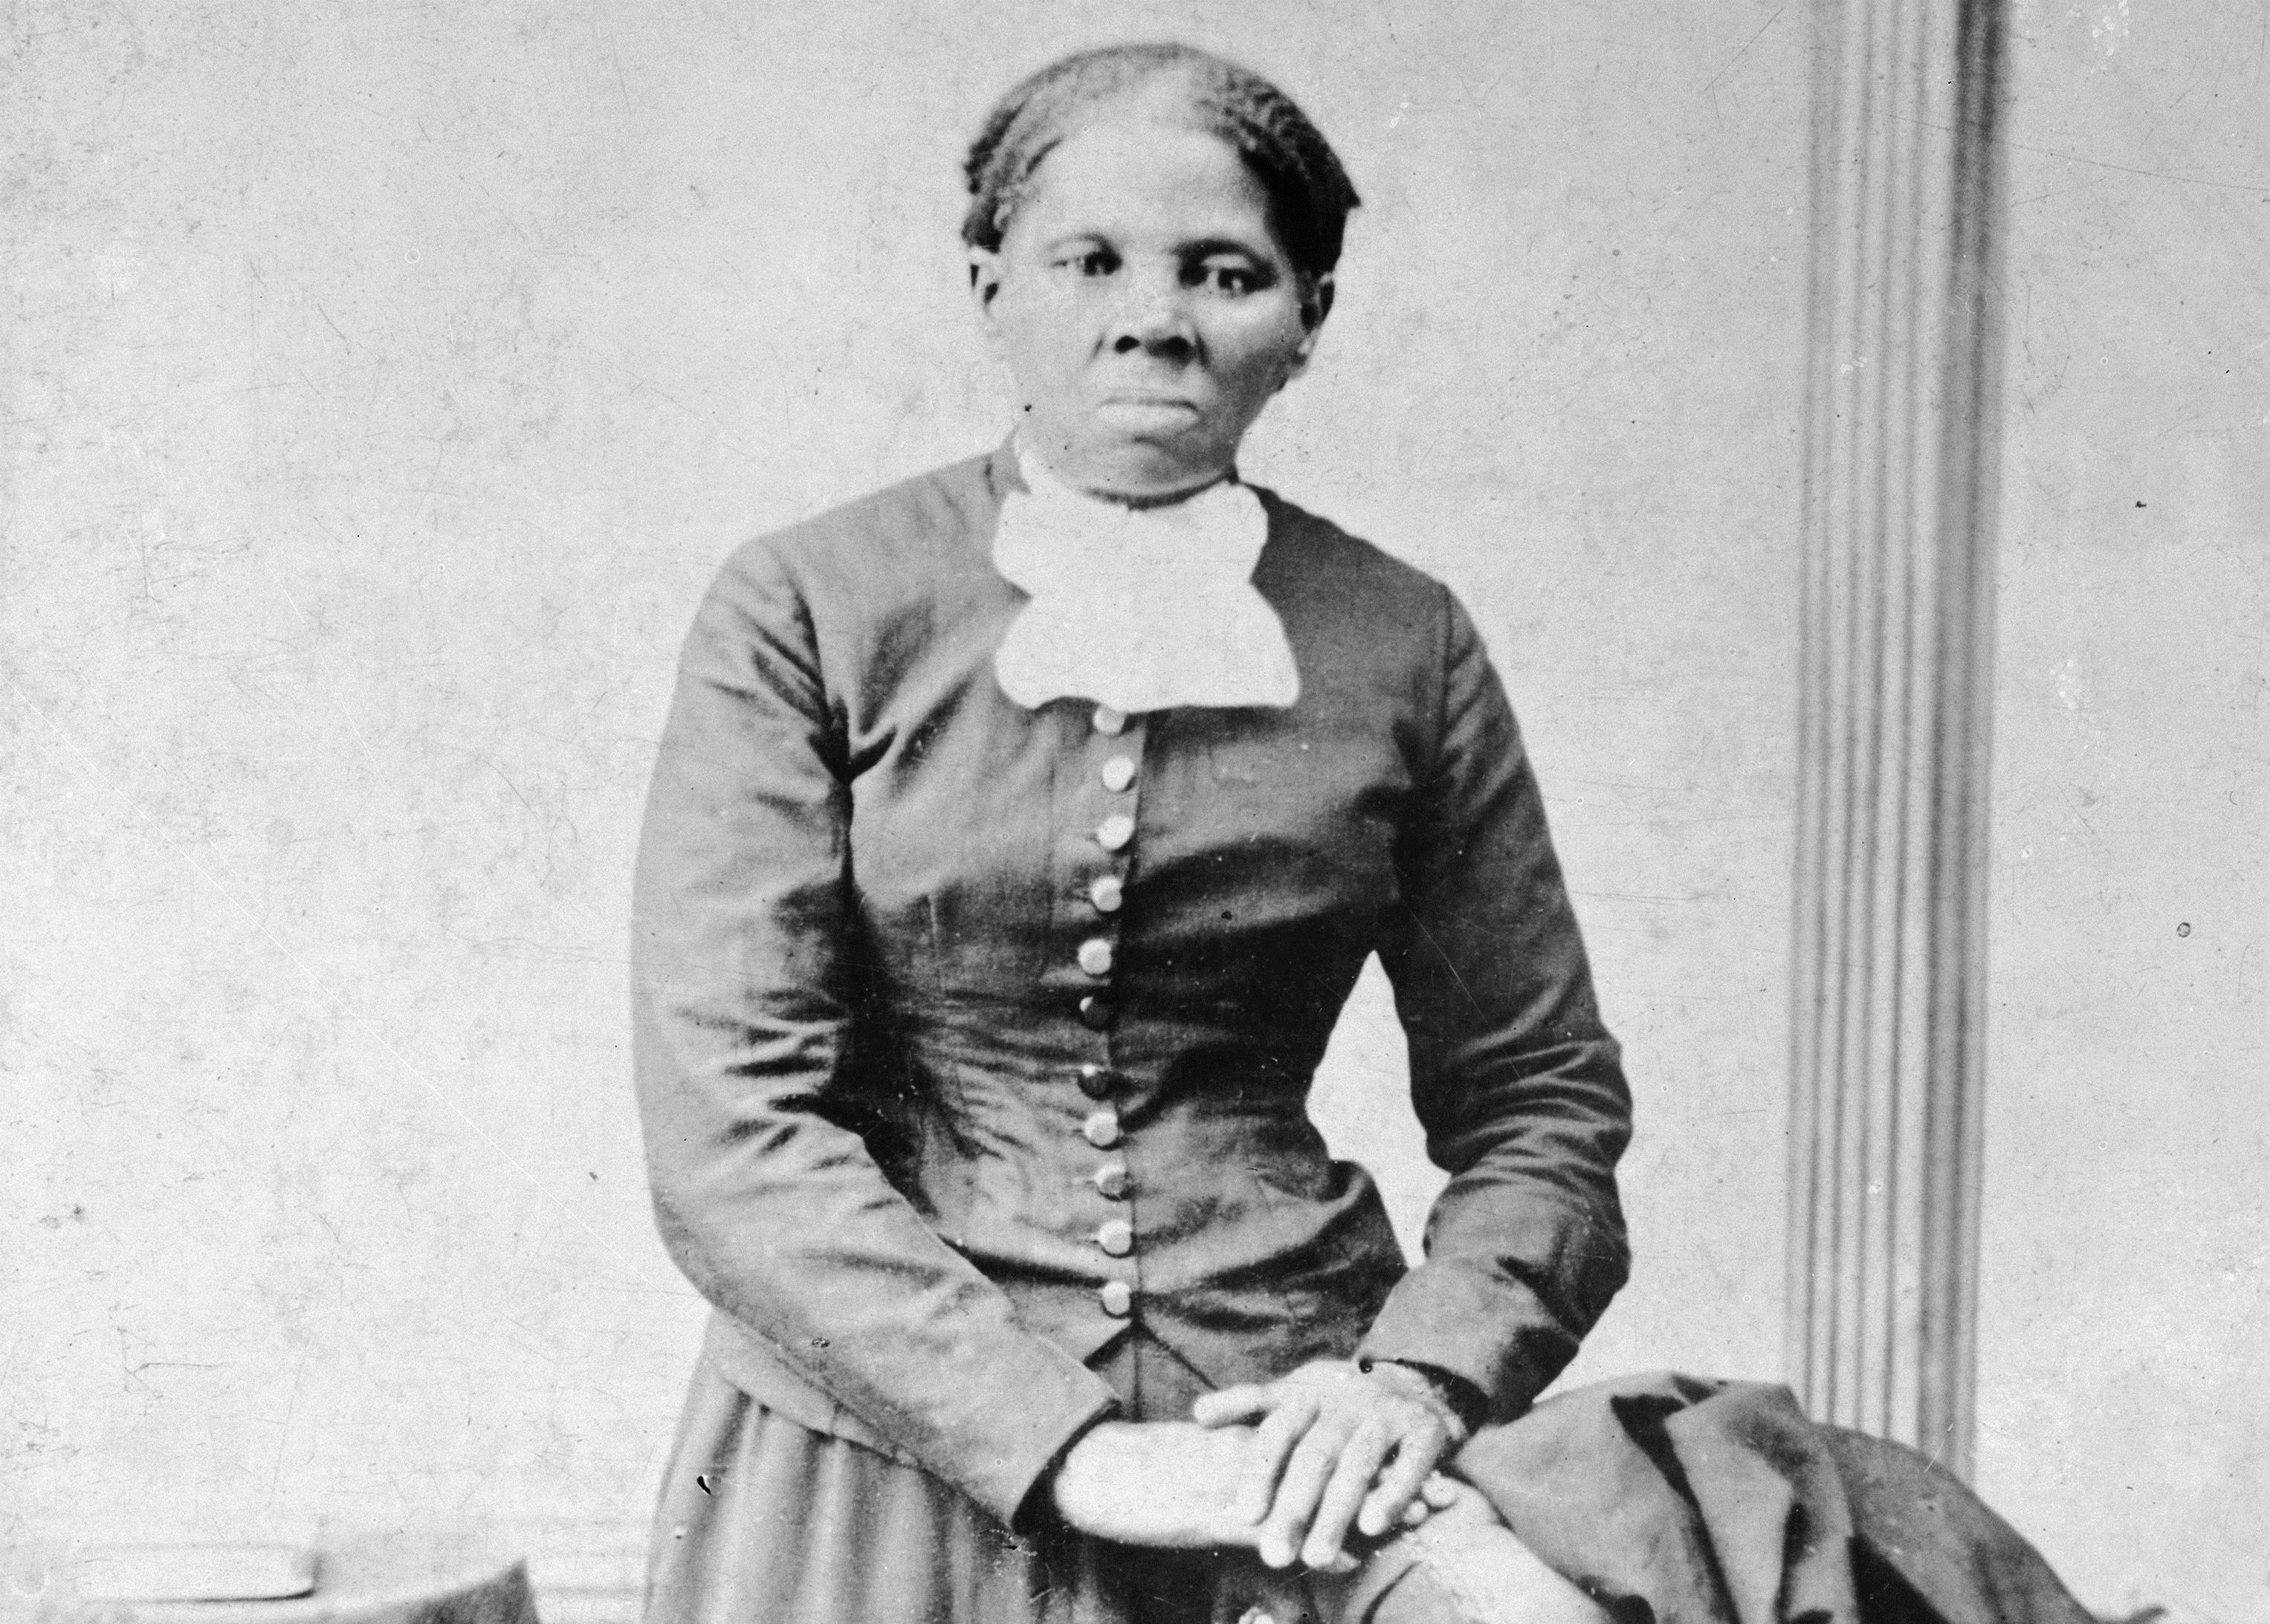 This image provided by the Library of Congress shows Harriet Tubman, between 1860 and 1875. (H.B. Lindsley)